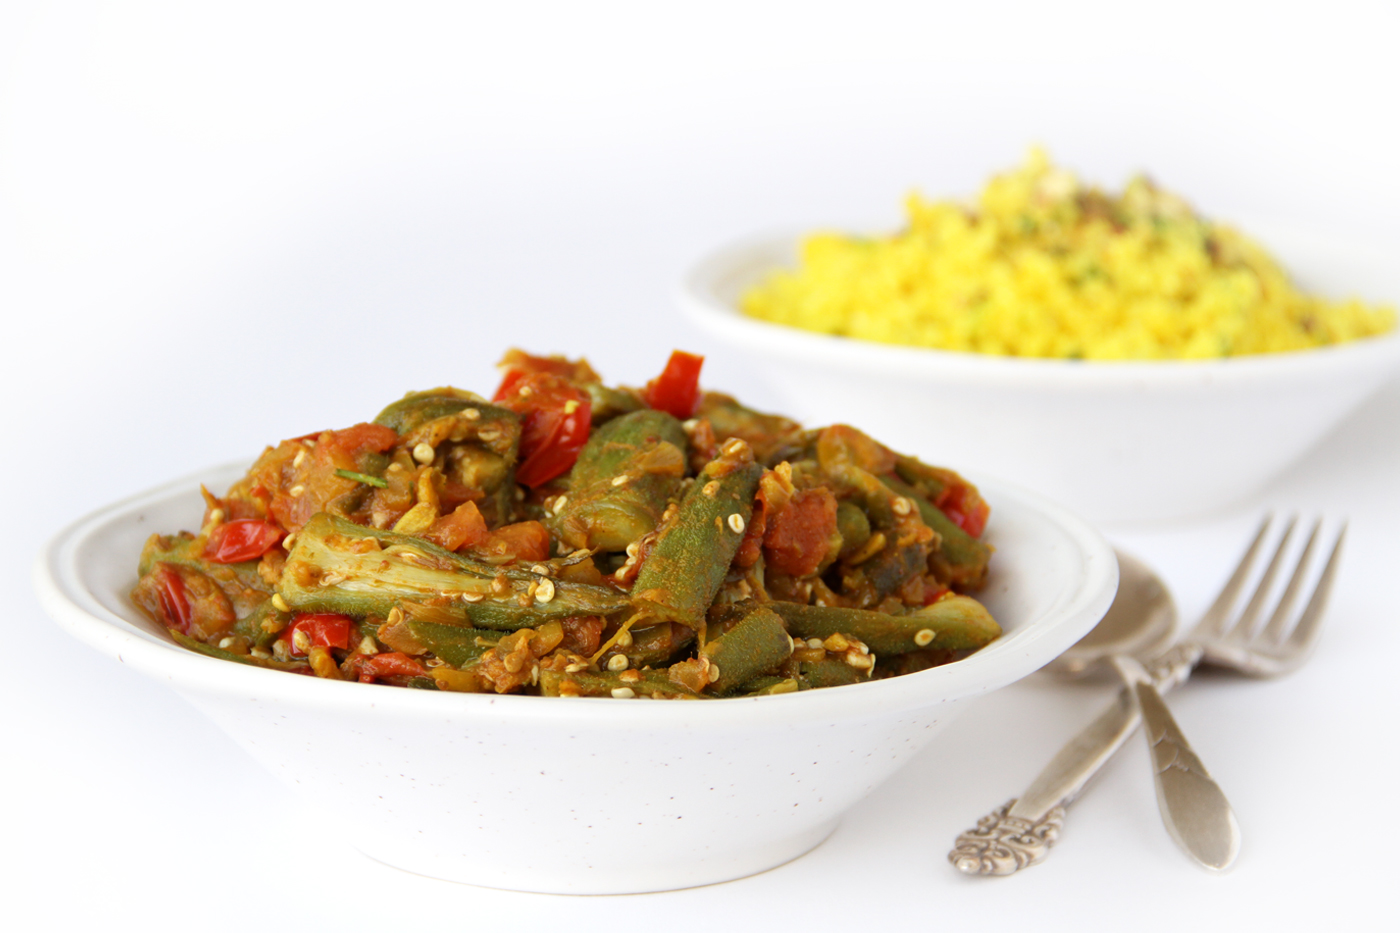 njoy this oil-free vegan okra recipe, that's also called Bhindi Masala, a popular Indian dish made with okra, onion, tomatoes & spices.